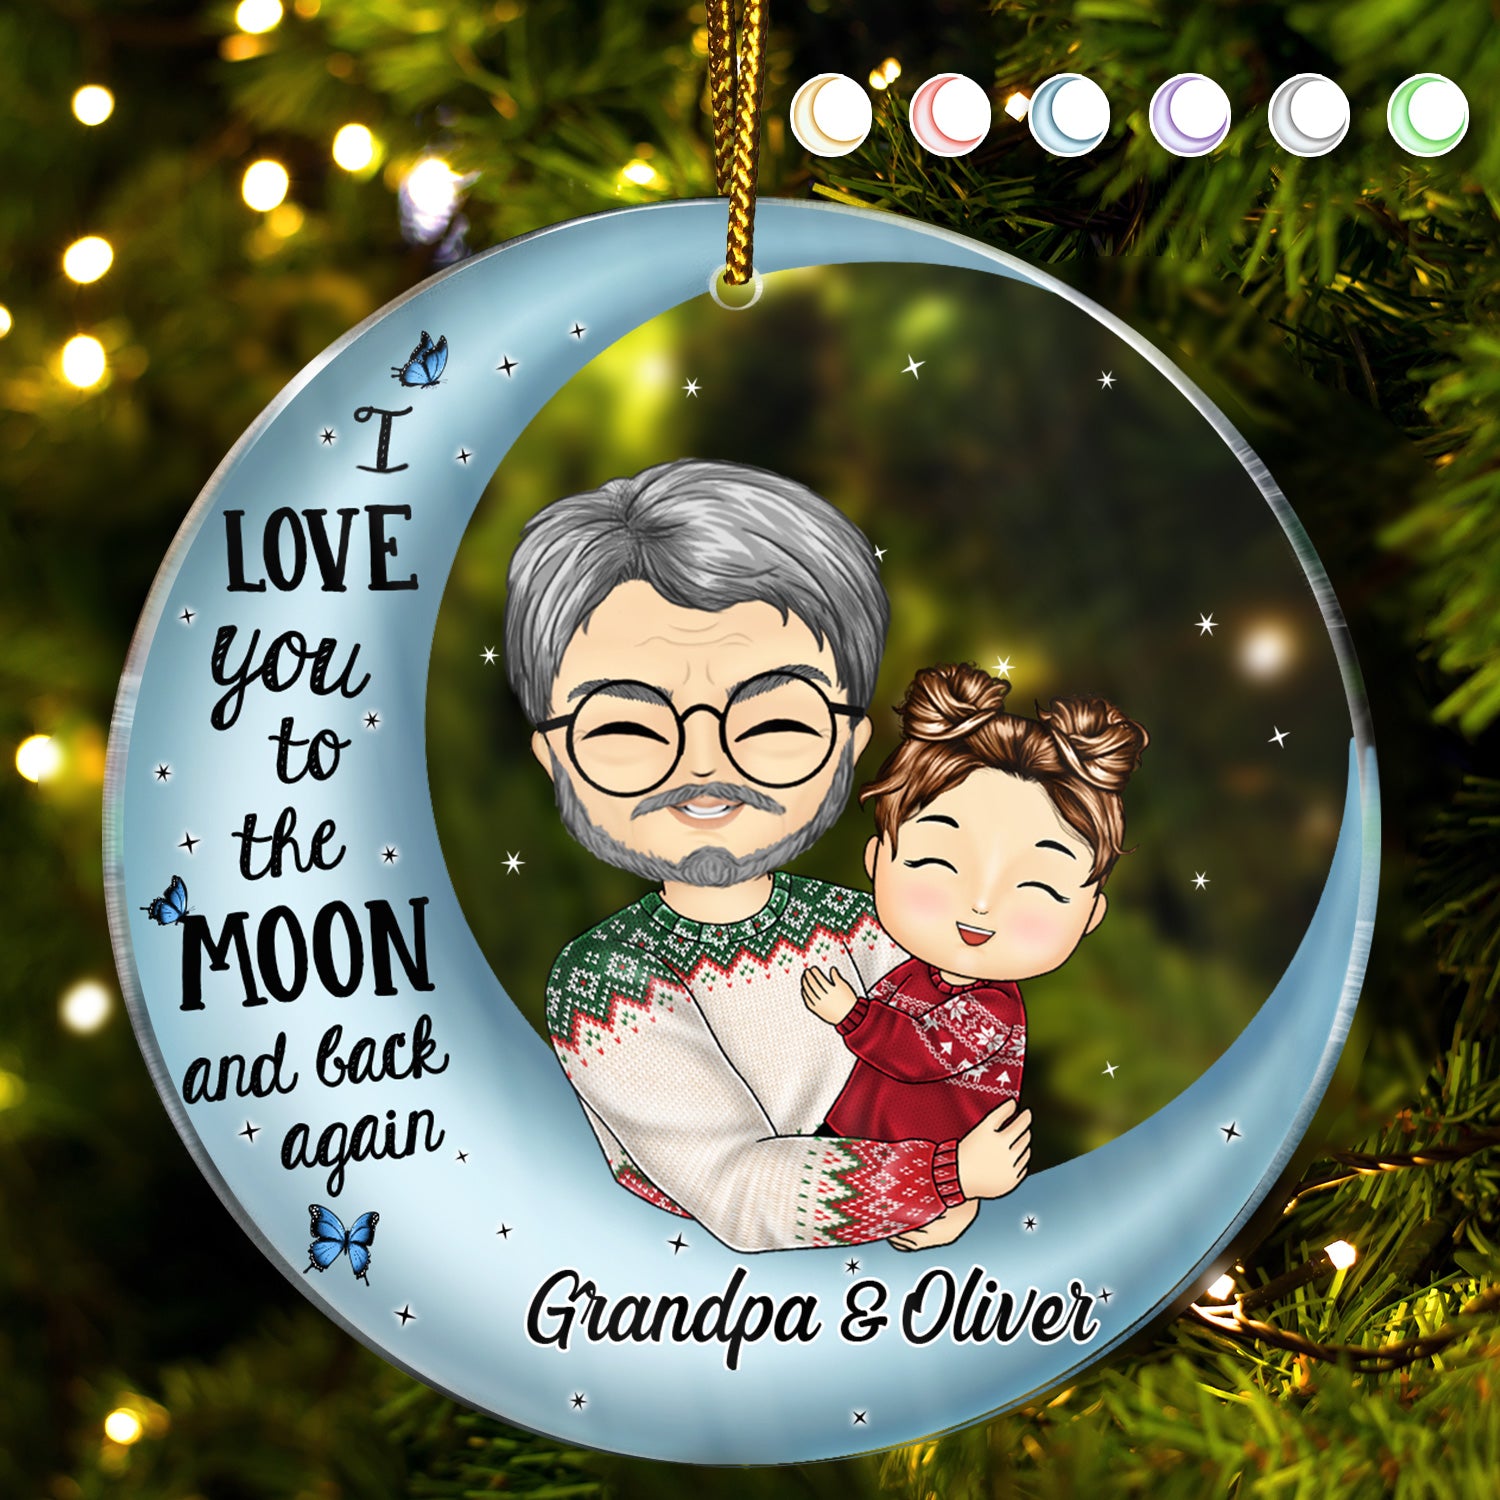 I Love You To The Moon And Back Grandpa Dad - Christmas Gift For Grandfather, Father, Grandkids - Personalized Circle Acrylic Ornament